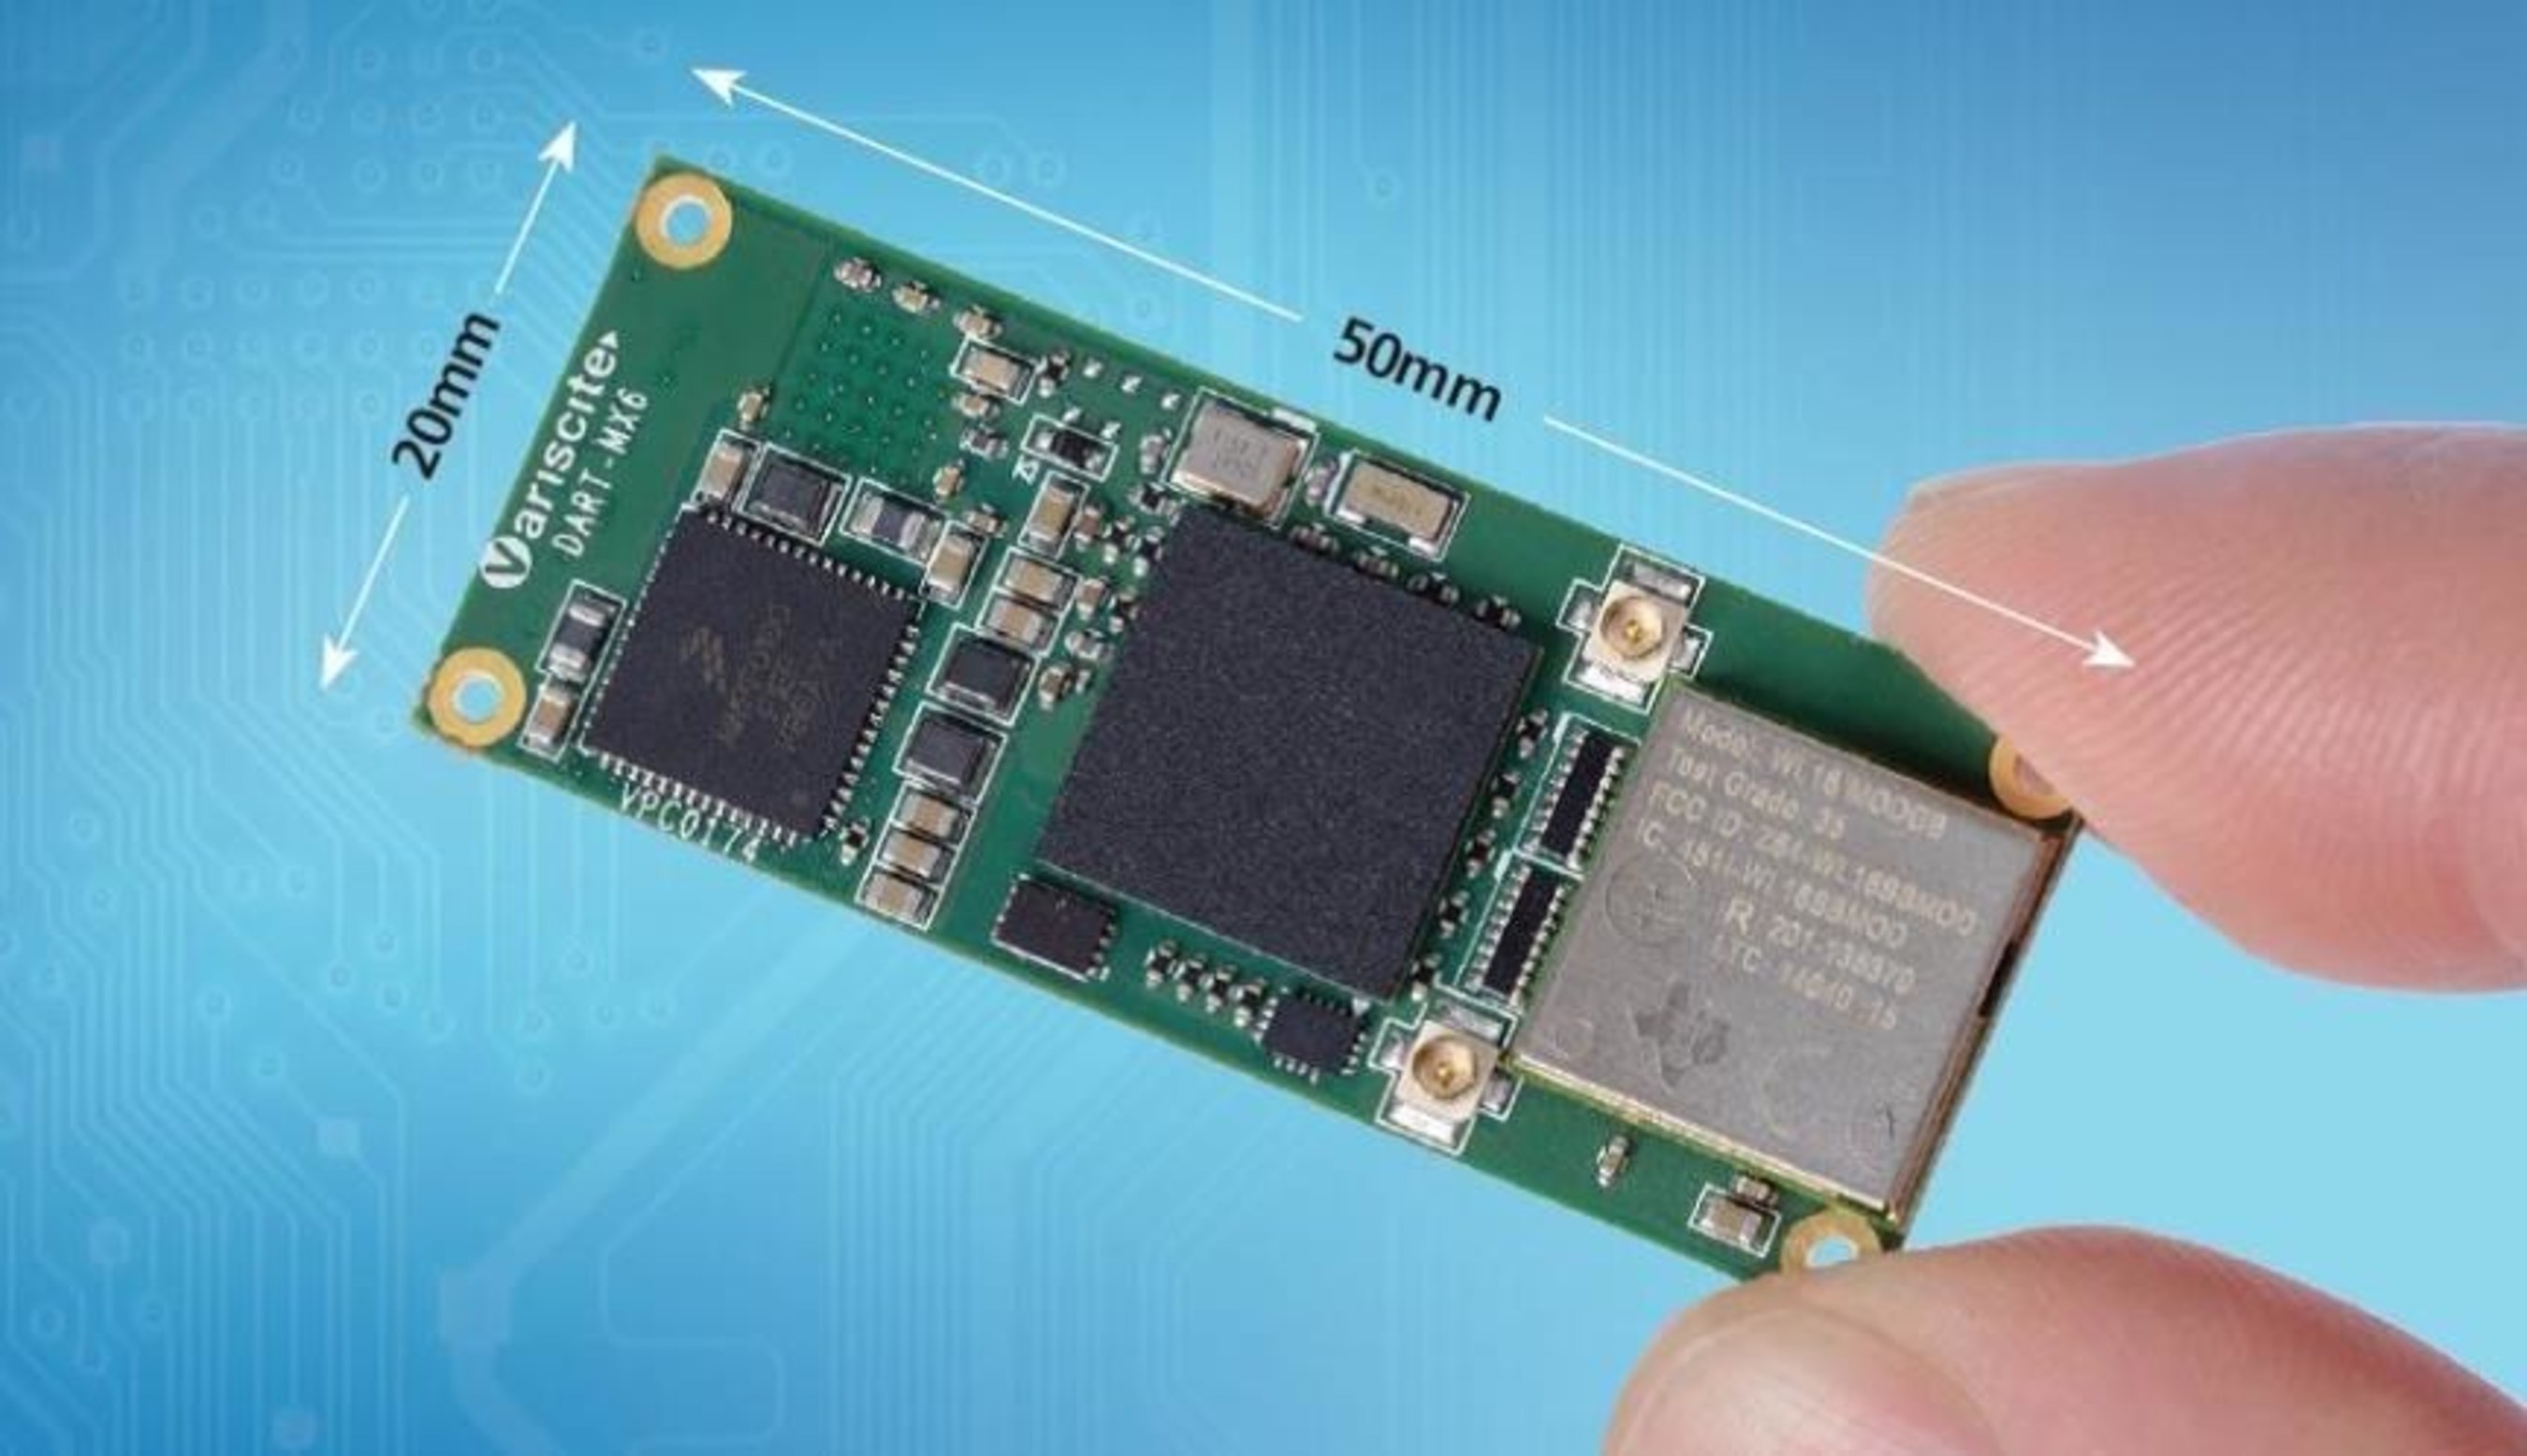 Measuring only 20x50x4mm, Variscite's DART-MX6 is the smallest Freescale i.MX6 System-on-Module in the market.